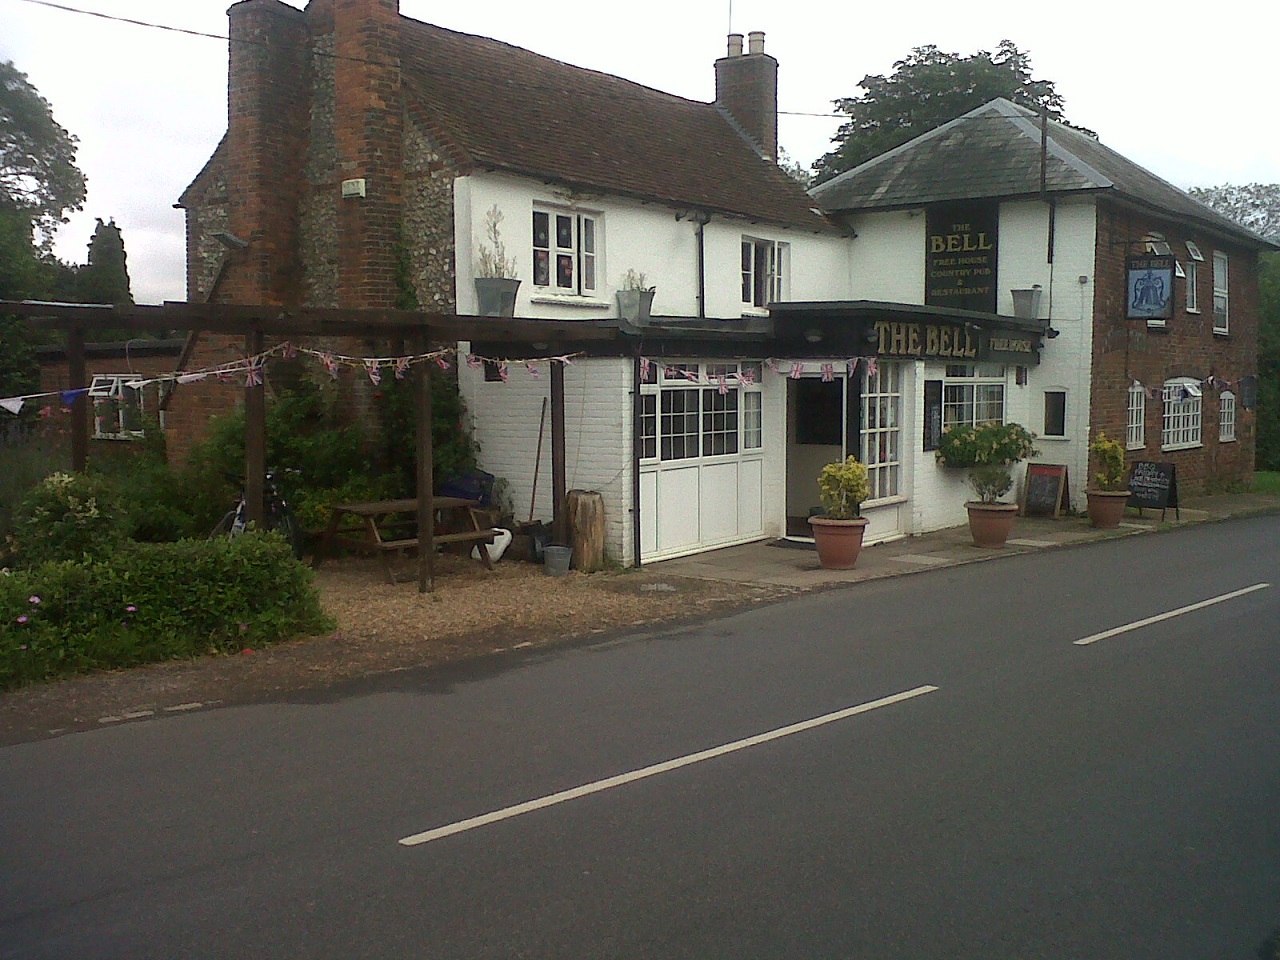 A road side two-building public house with a side garden. A bench and some bunting are present.